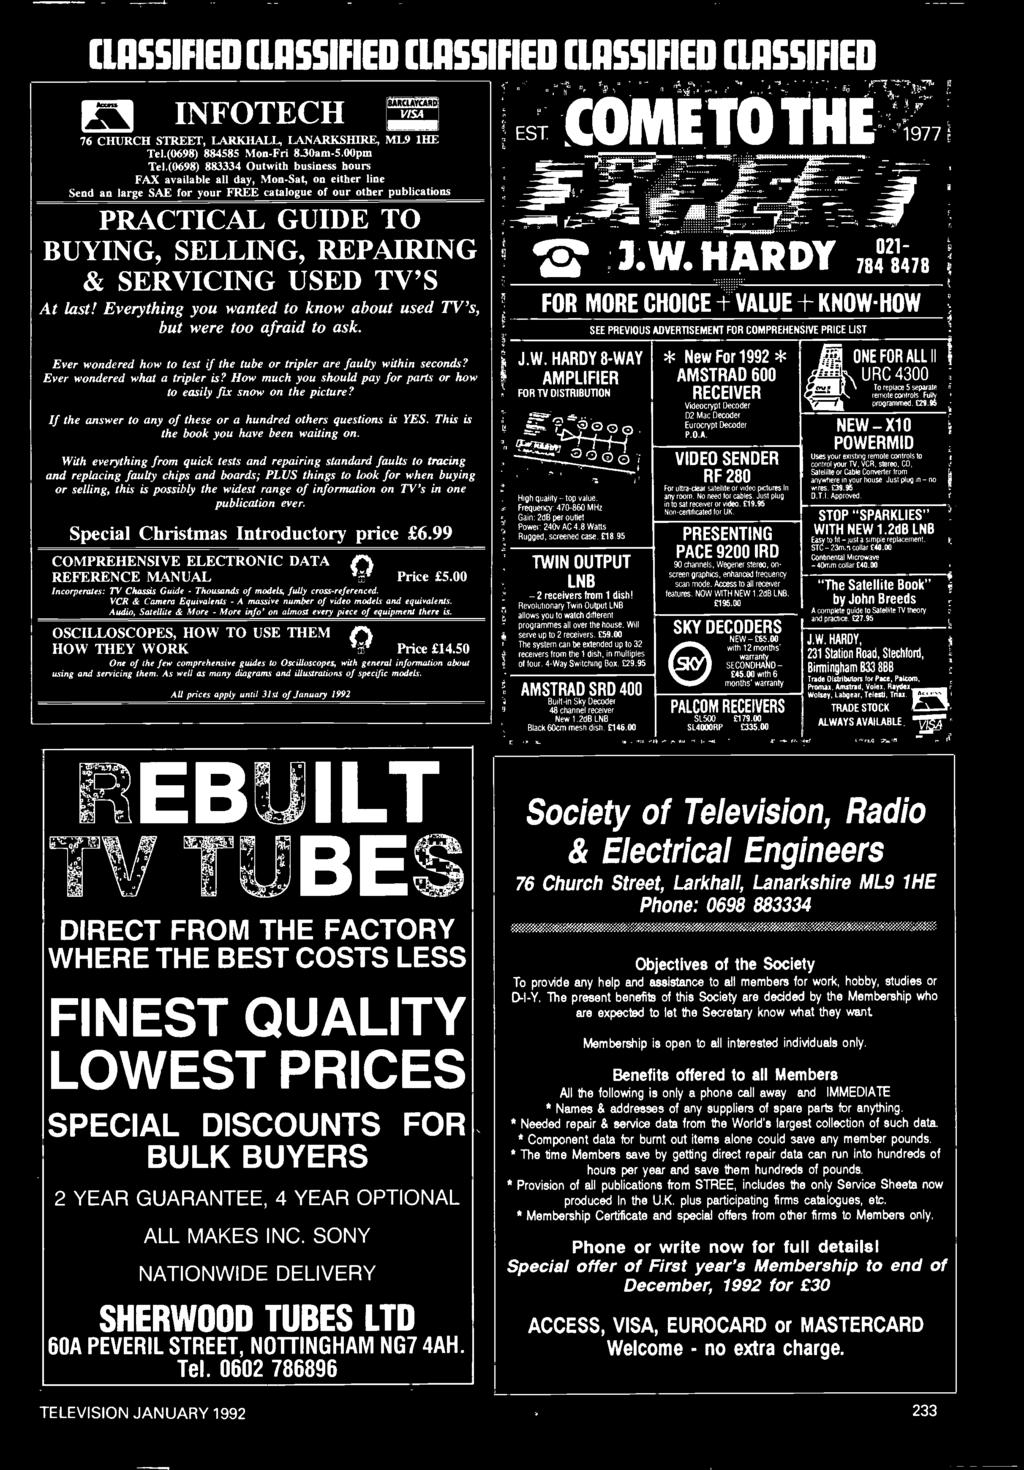 & SERVICING USED TV'S At last! Everything you wanted to know about used TV's, but were too afraid to ask. Ever wondered how to test if the tube or tripler are faulty within seconds?